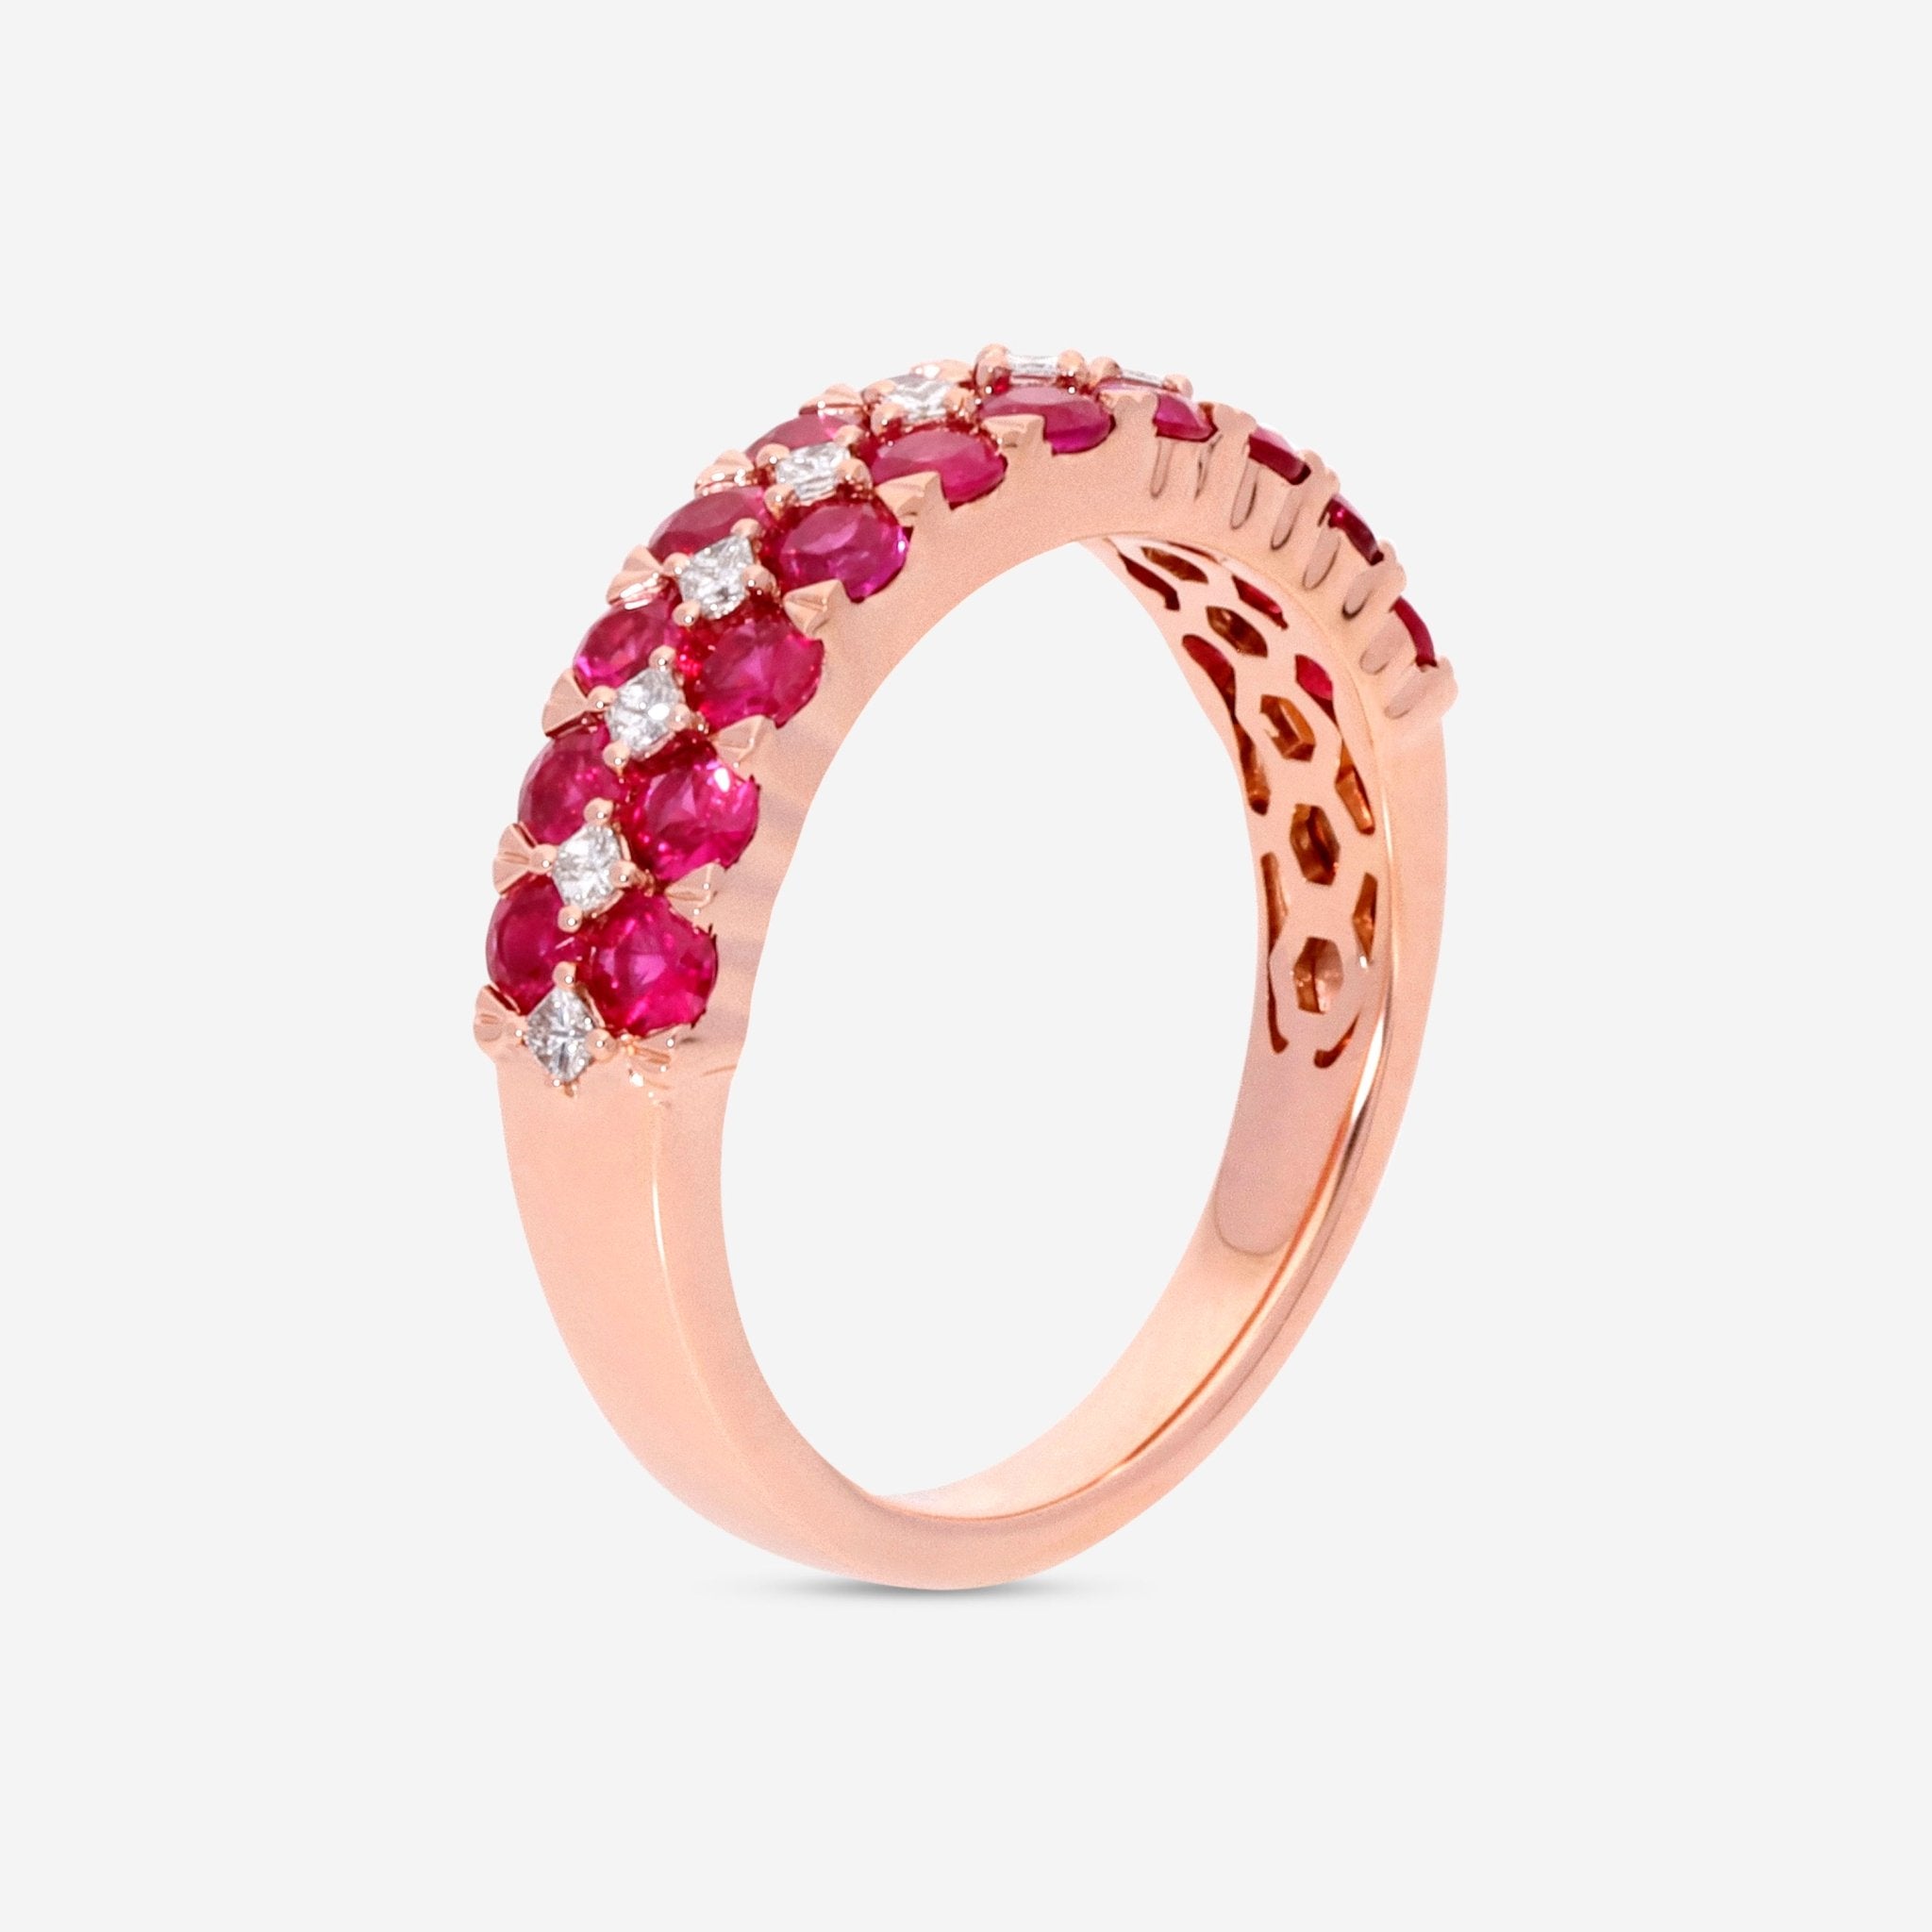 Ina Mar 14K Rose Gold Ruby & Diamond Double Row Ring RG - 085922 - Ruby - THE SOLIST - Ina Mar